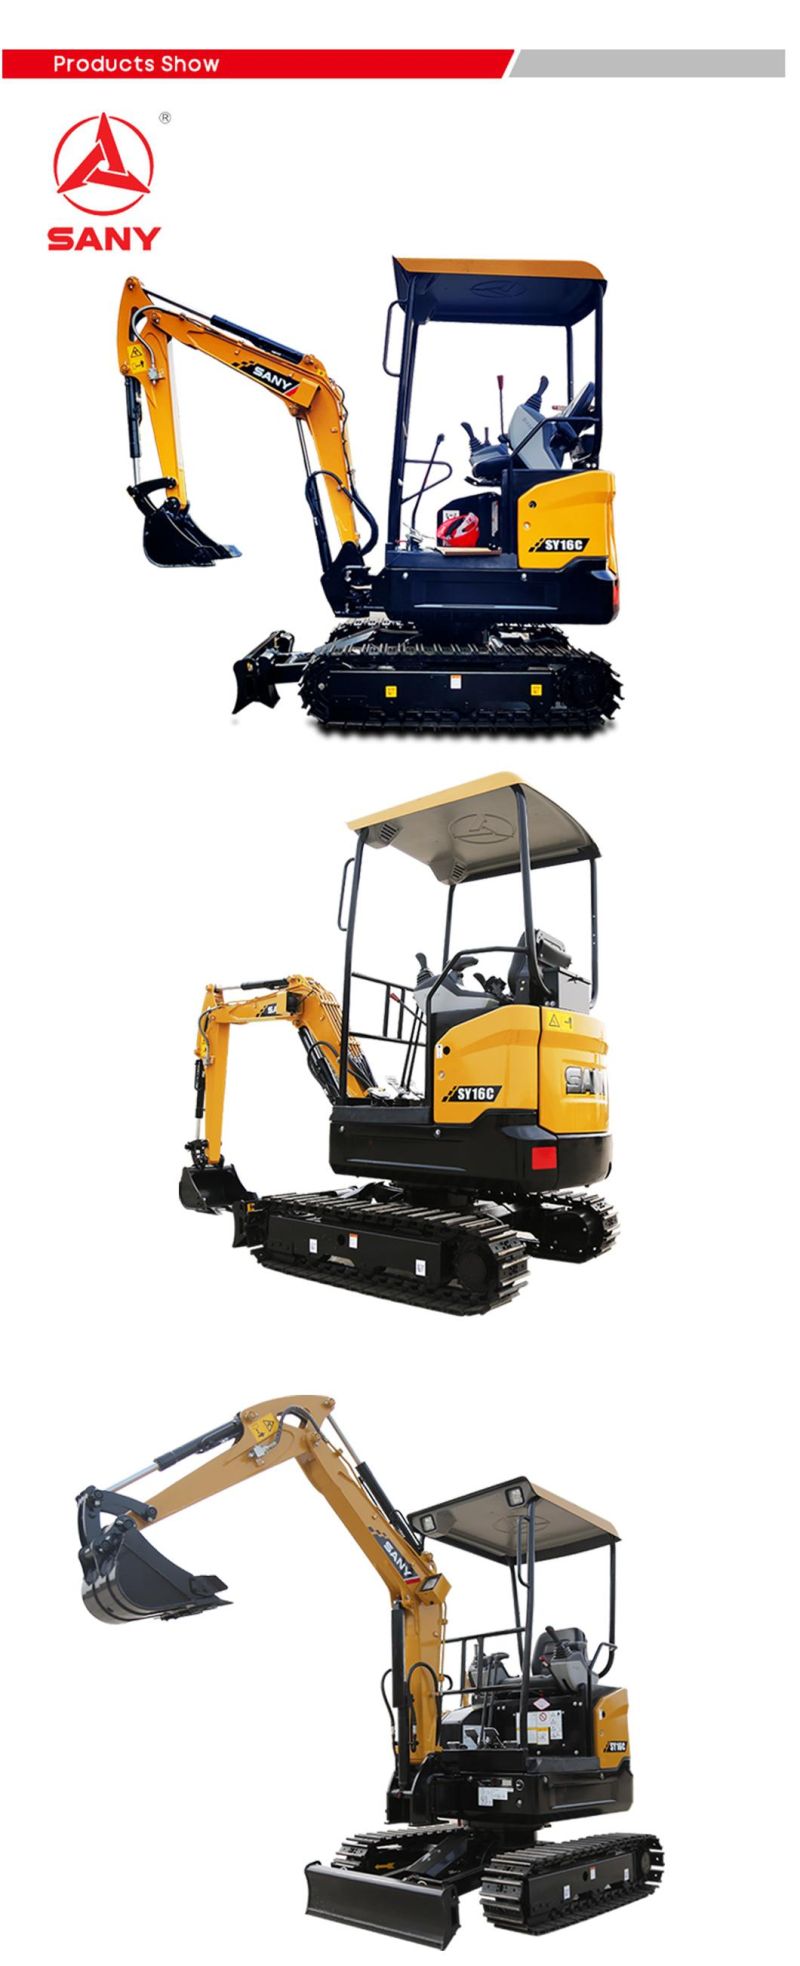 Sany Sy16c 1.75tons Mini Garden Excavator with Closed Cabin Price